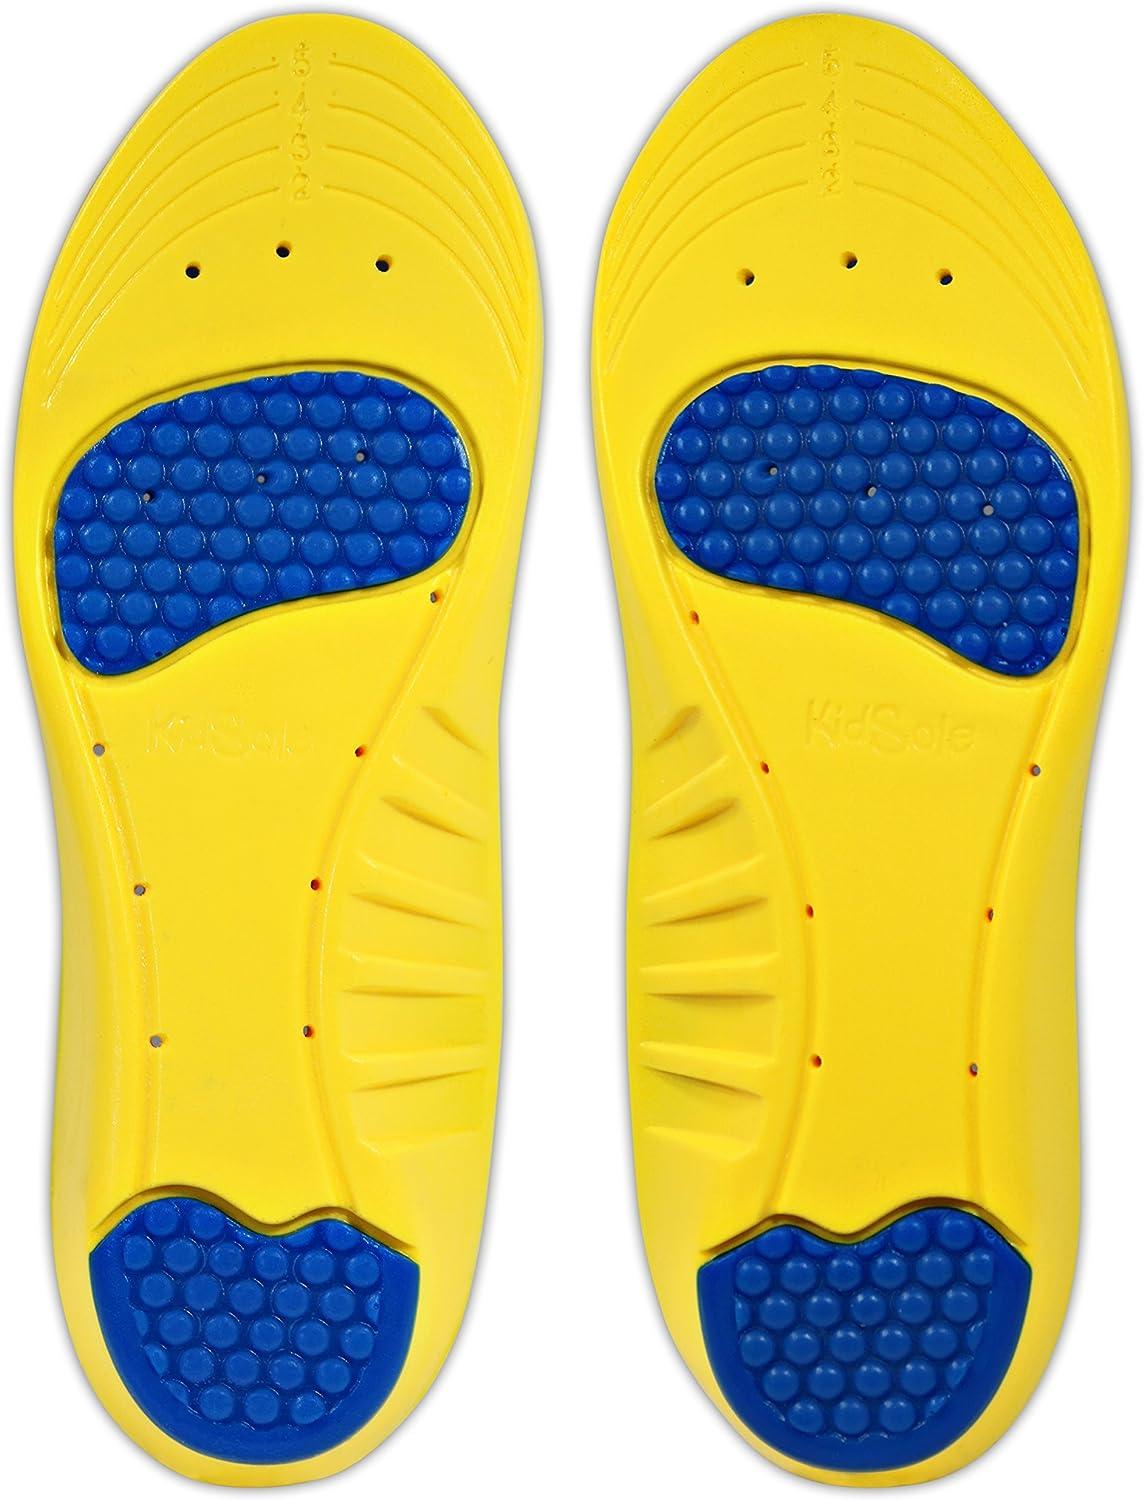 Children's Athletic Memory Foam Insoles for Arch Support and